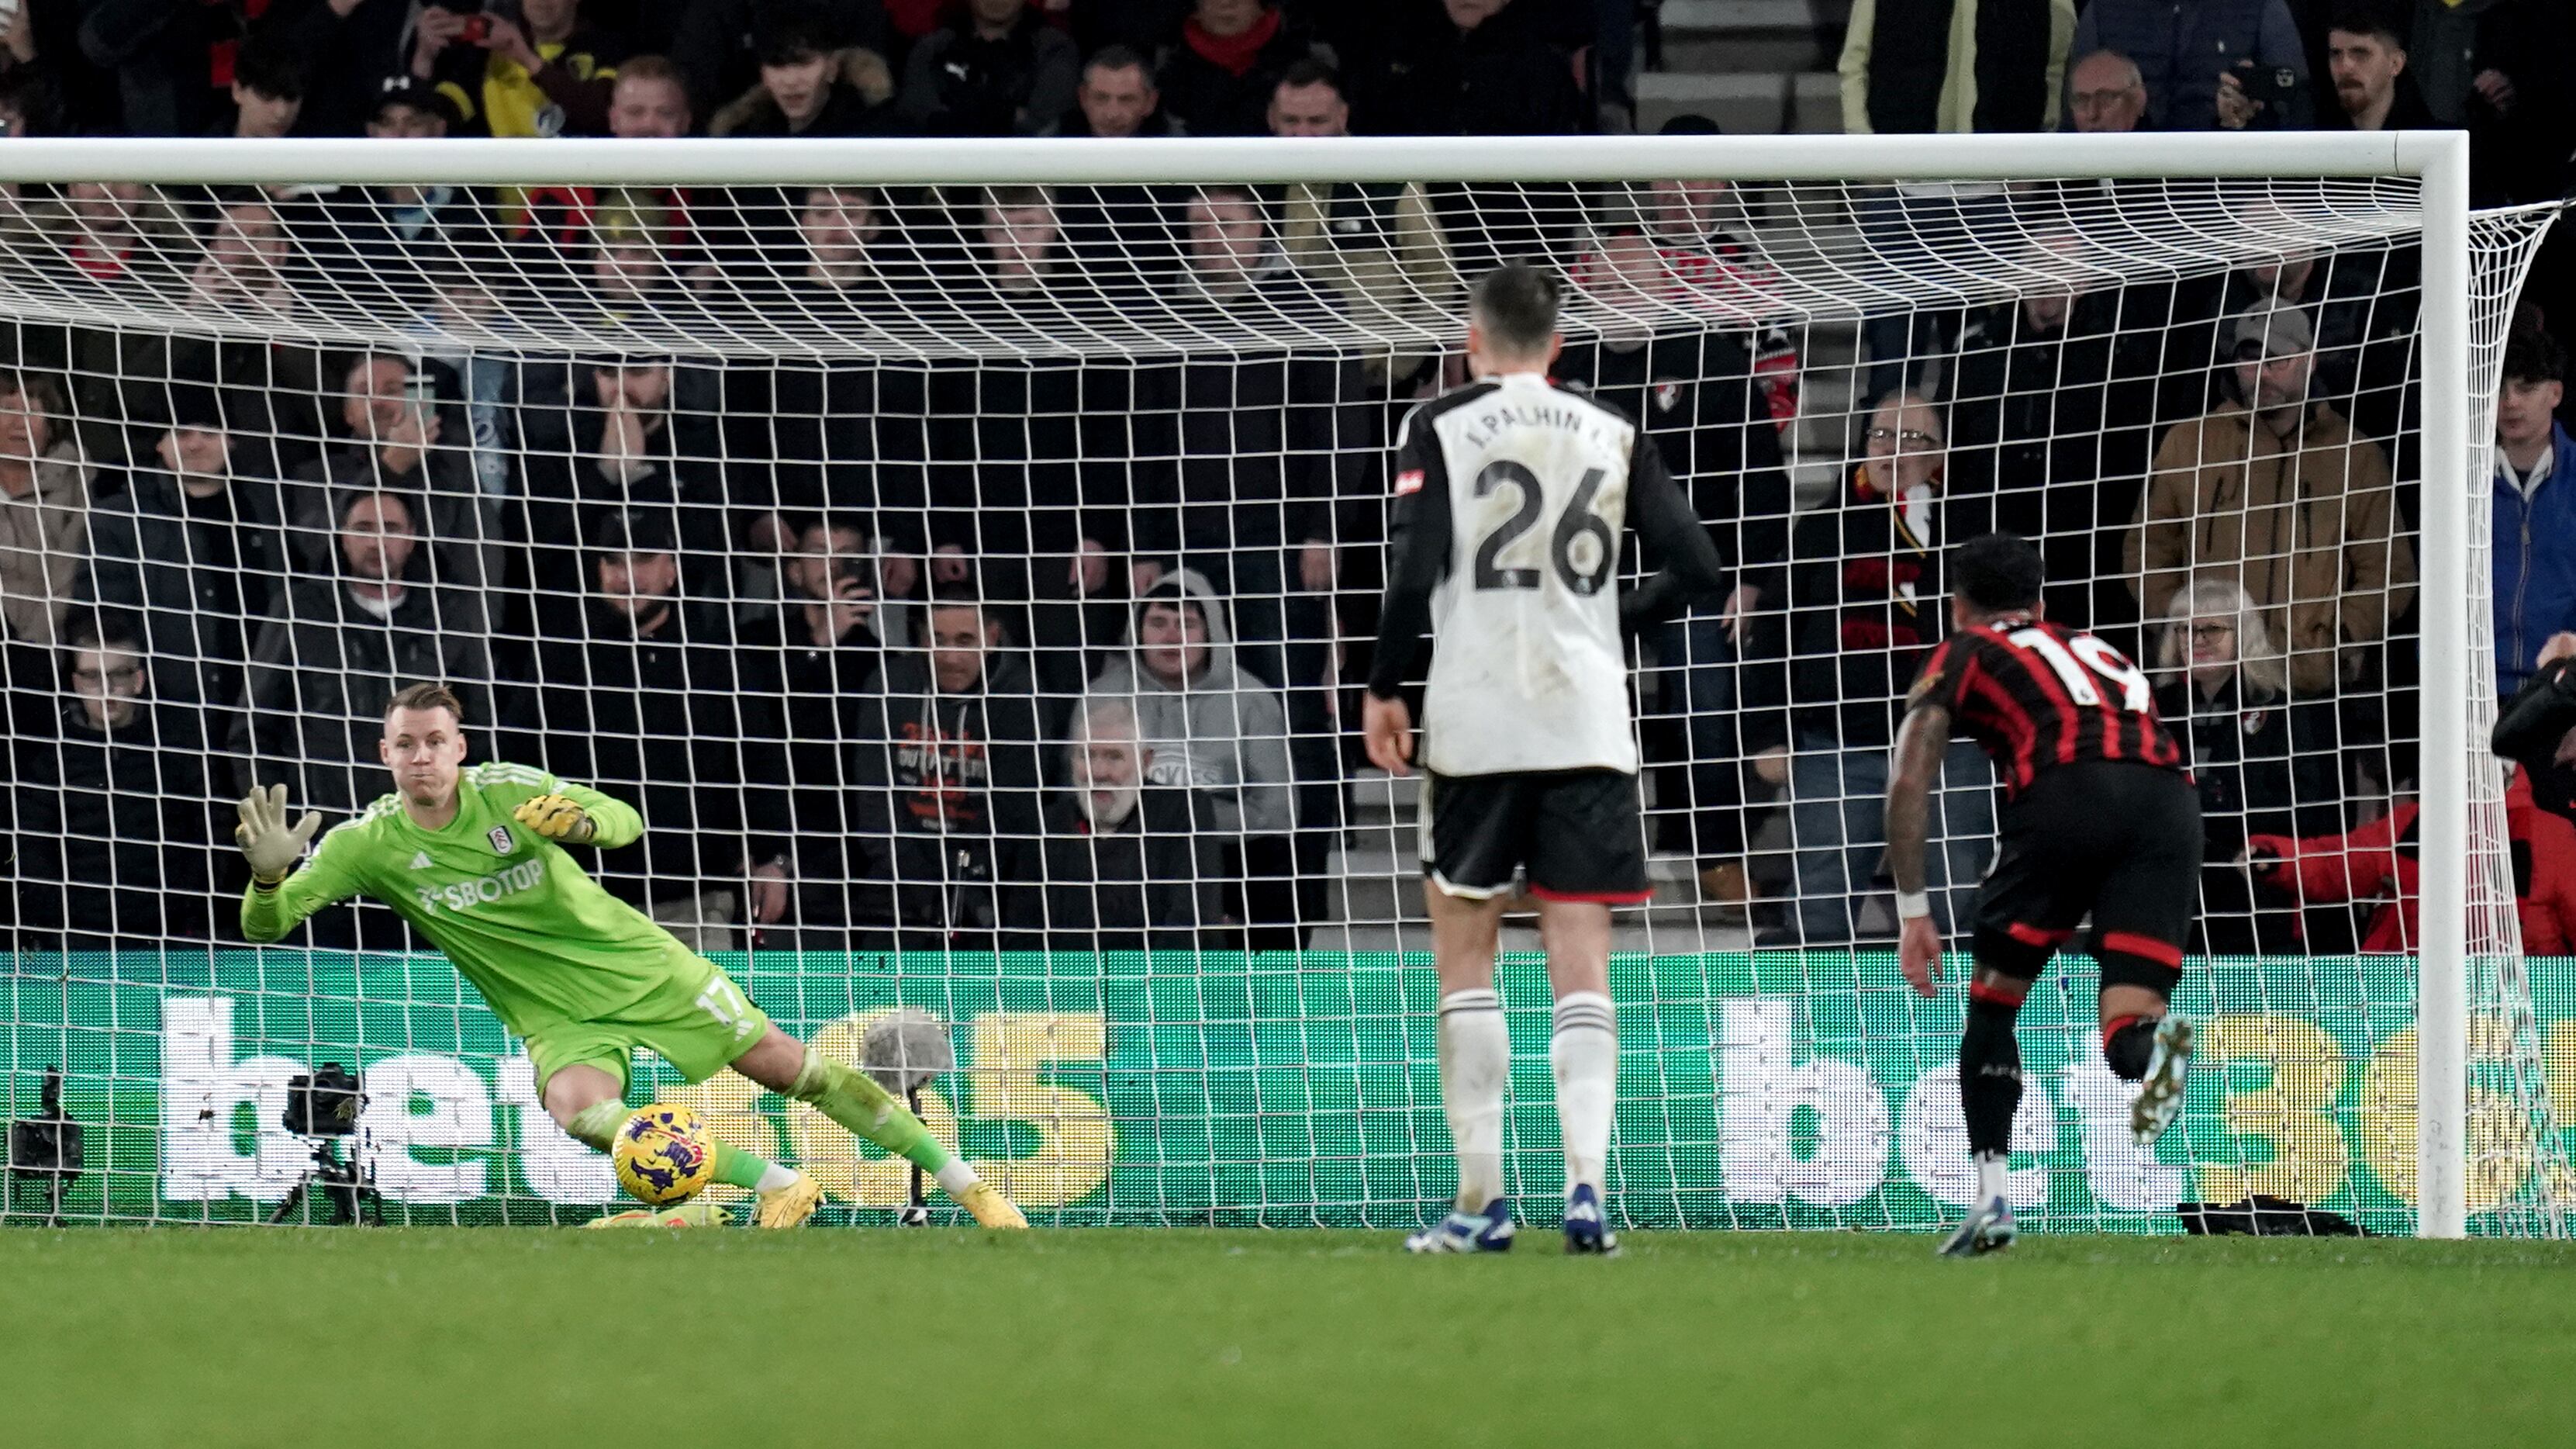 Bournemouth’s Dominic Solanke (right) scores his side’s second goal from the penalty spot